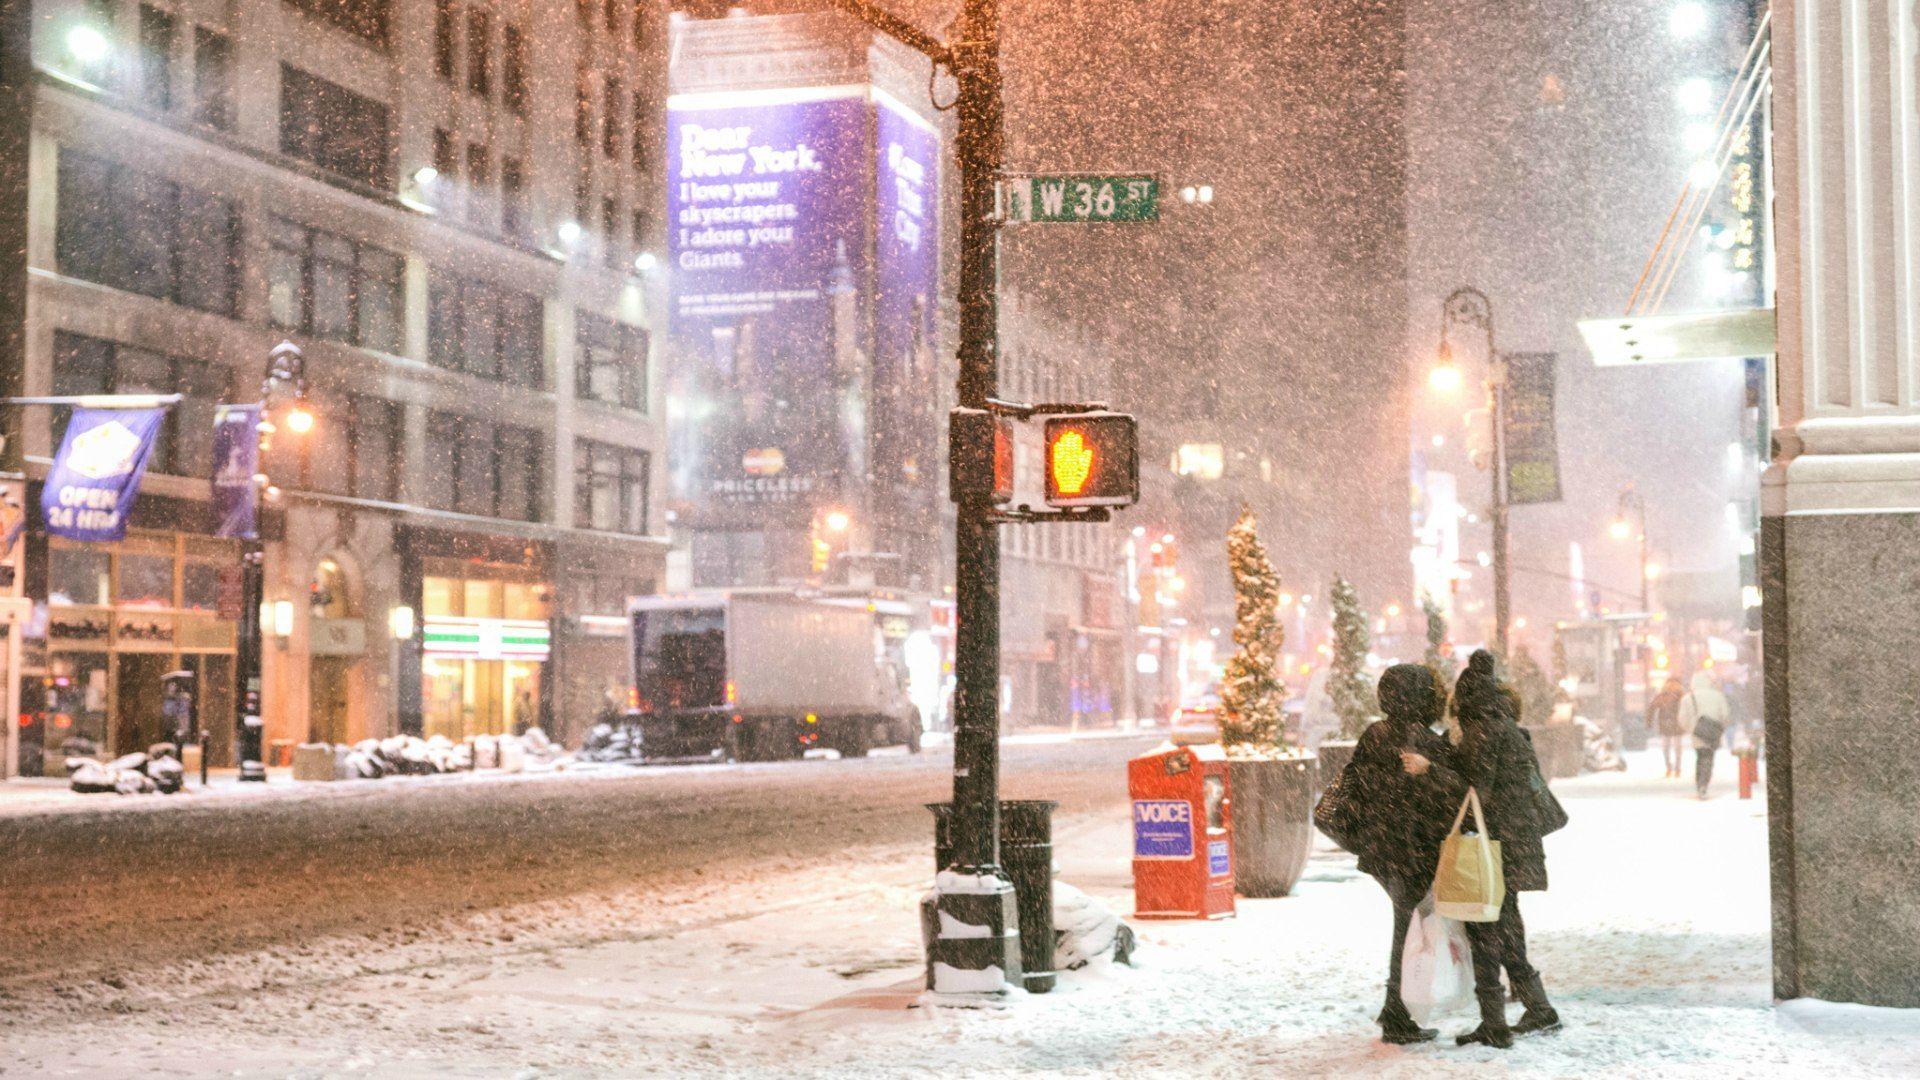 Winter snowfall in New York wallpaper and image